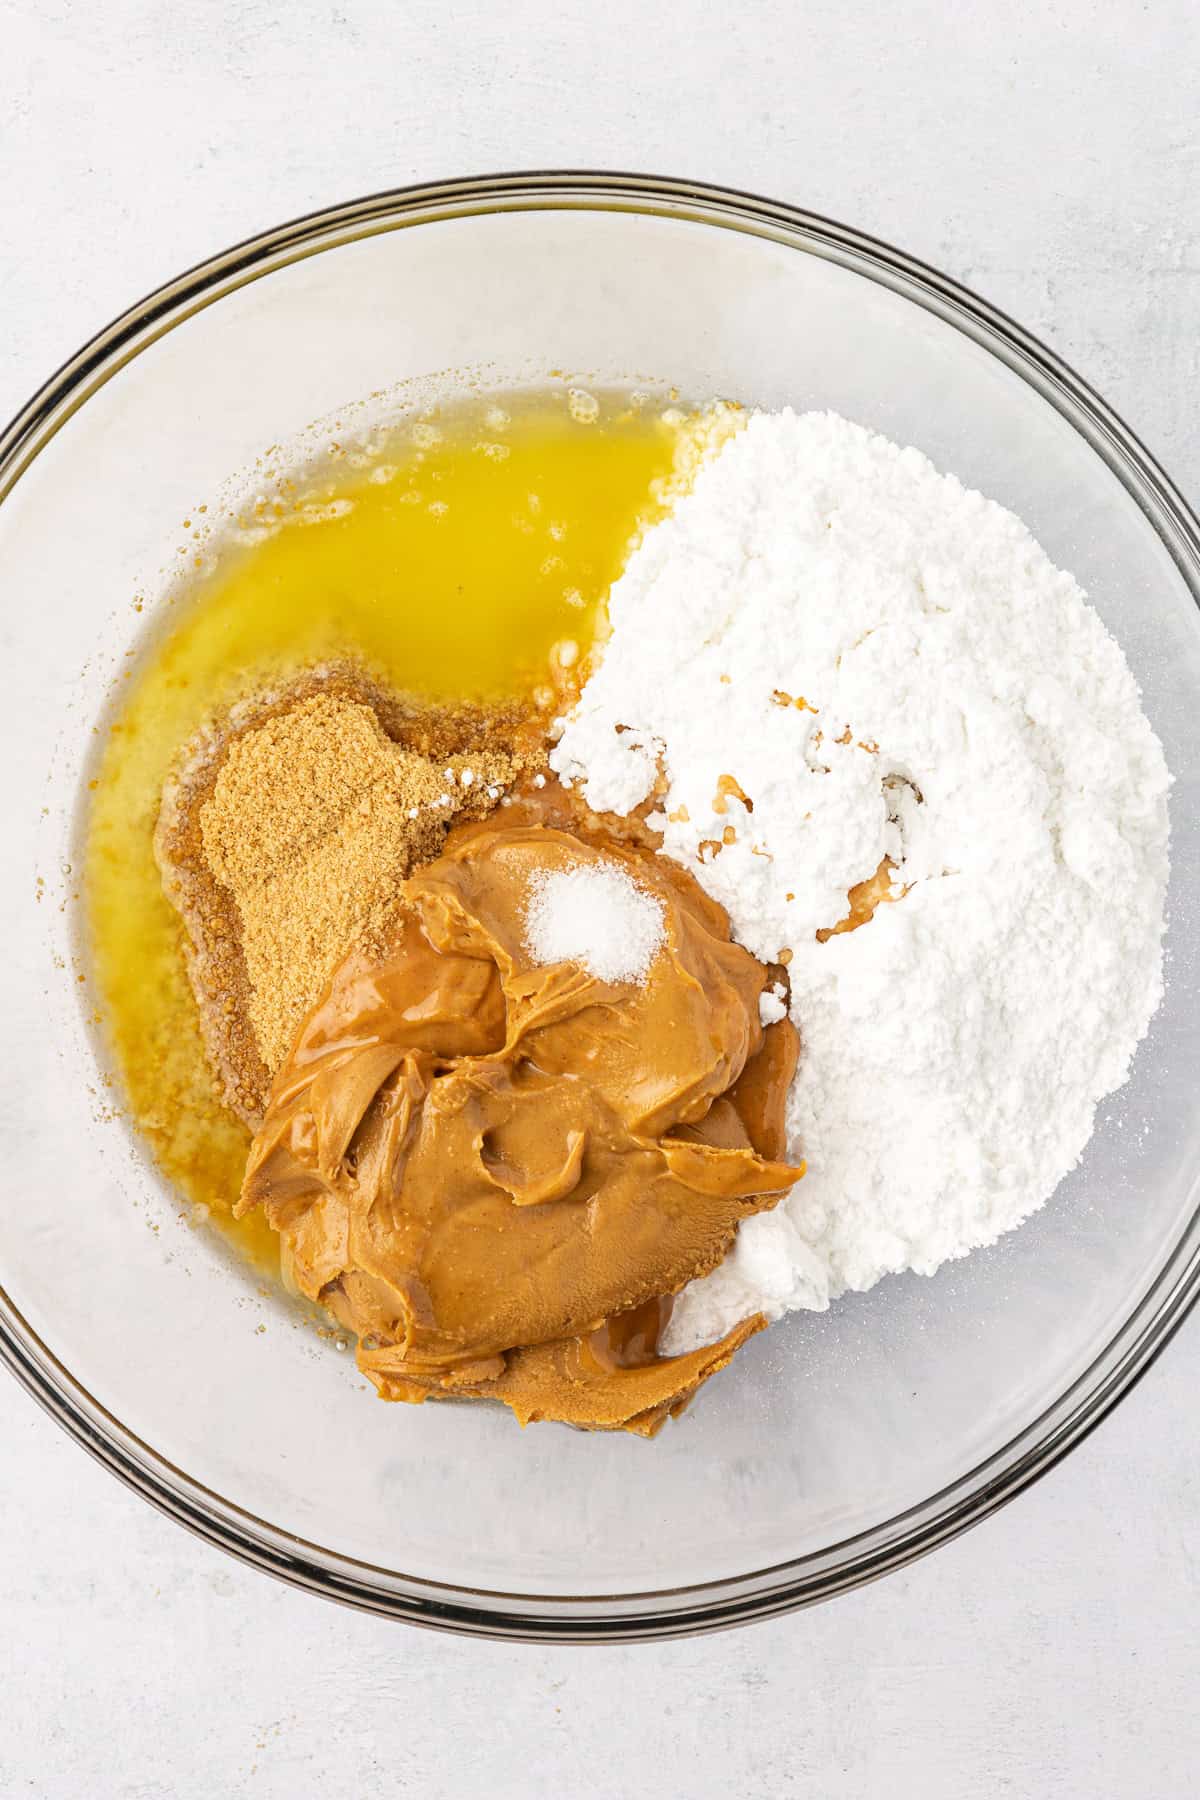 melted butter, powdered sugar, graham cracker crumbs and creamy peanut butter in a clear glass bowl